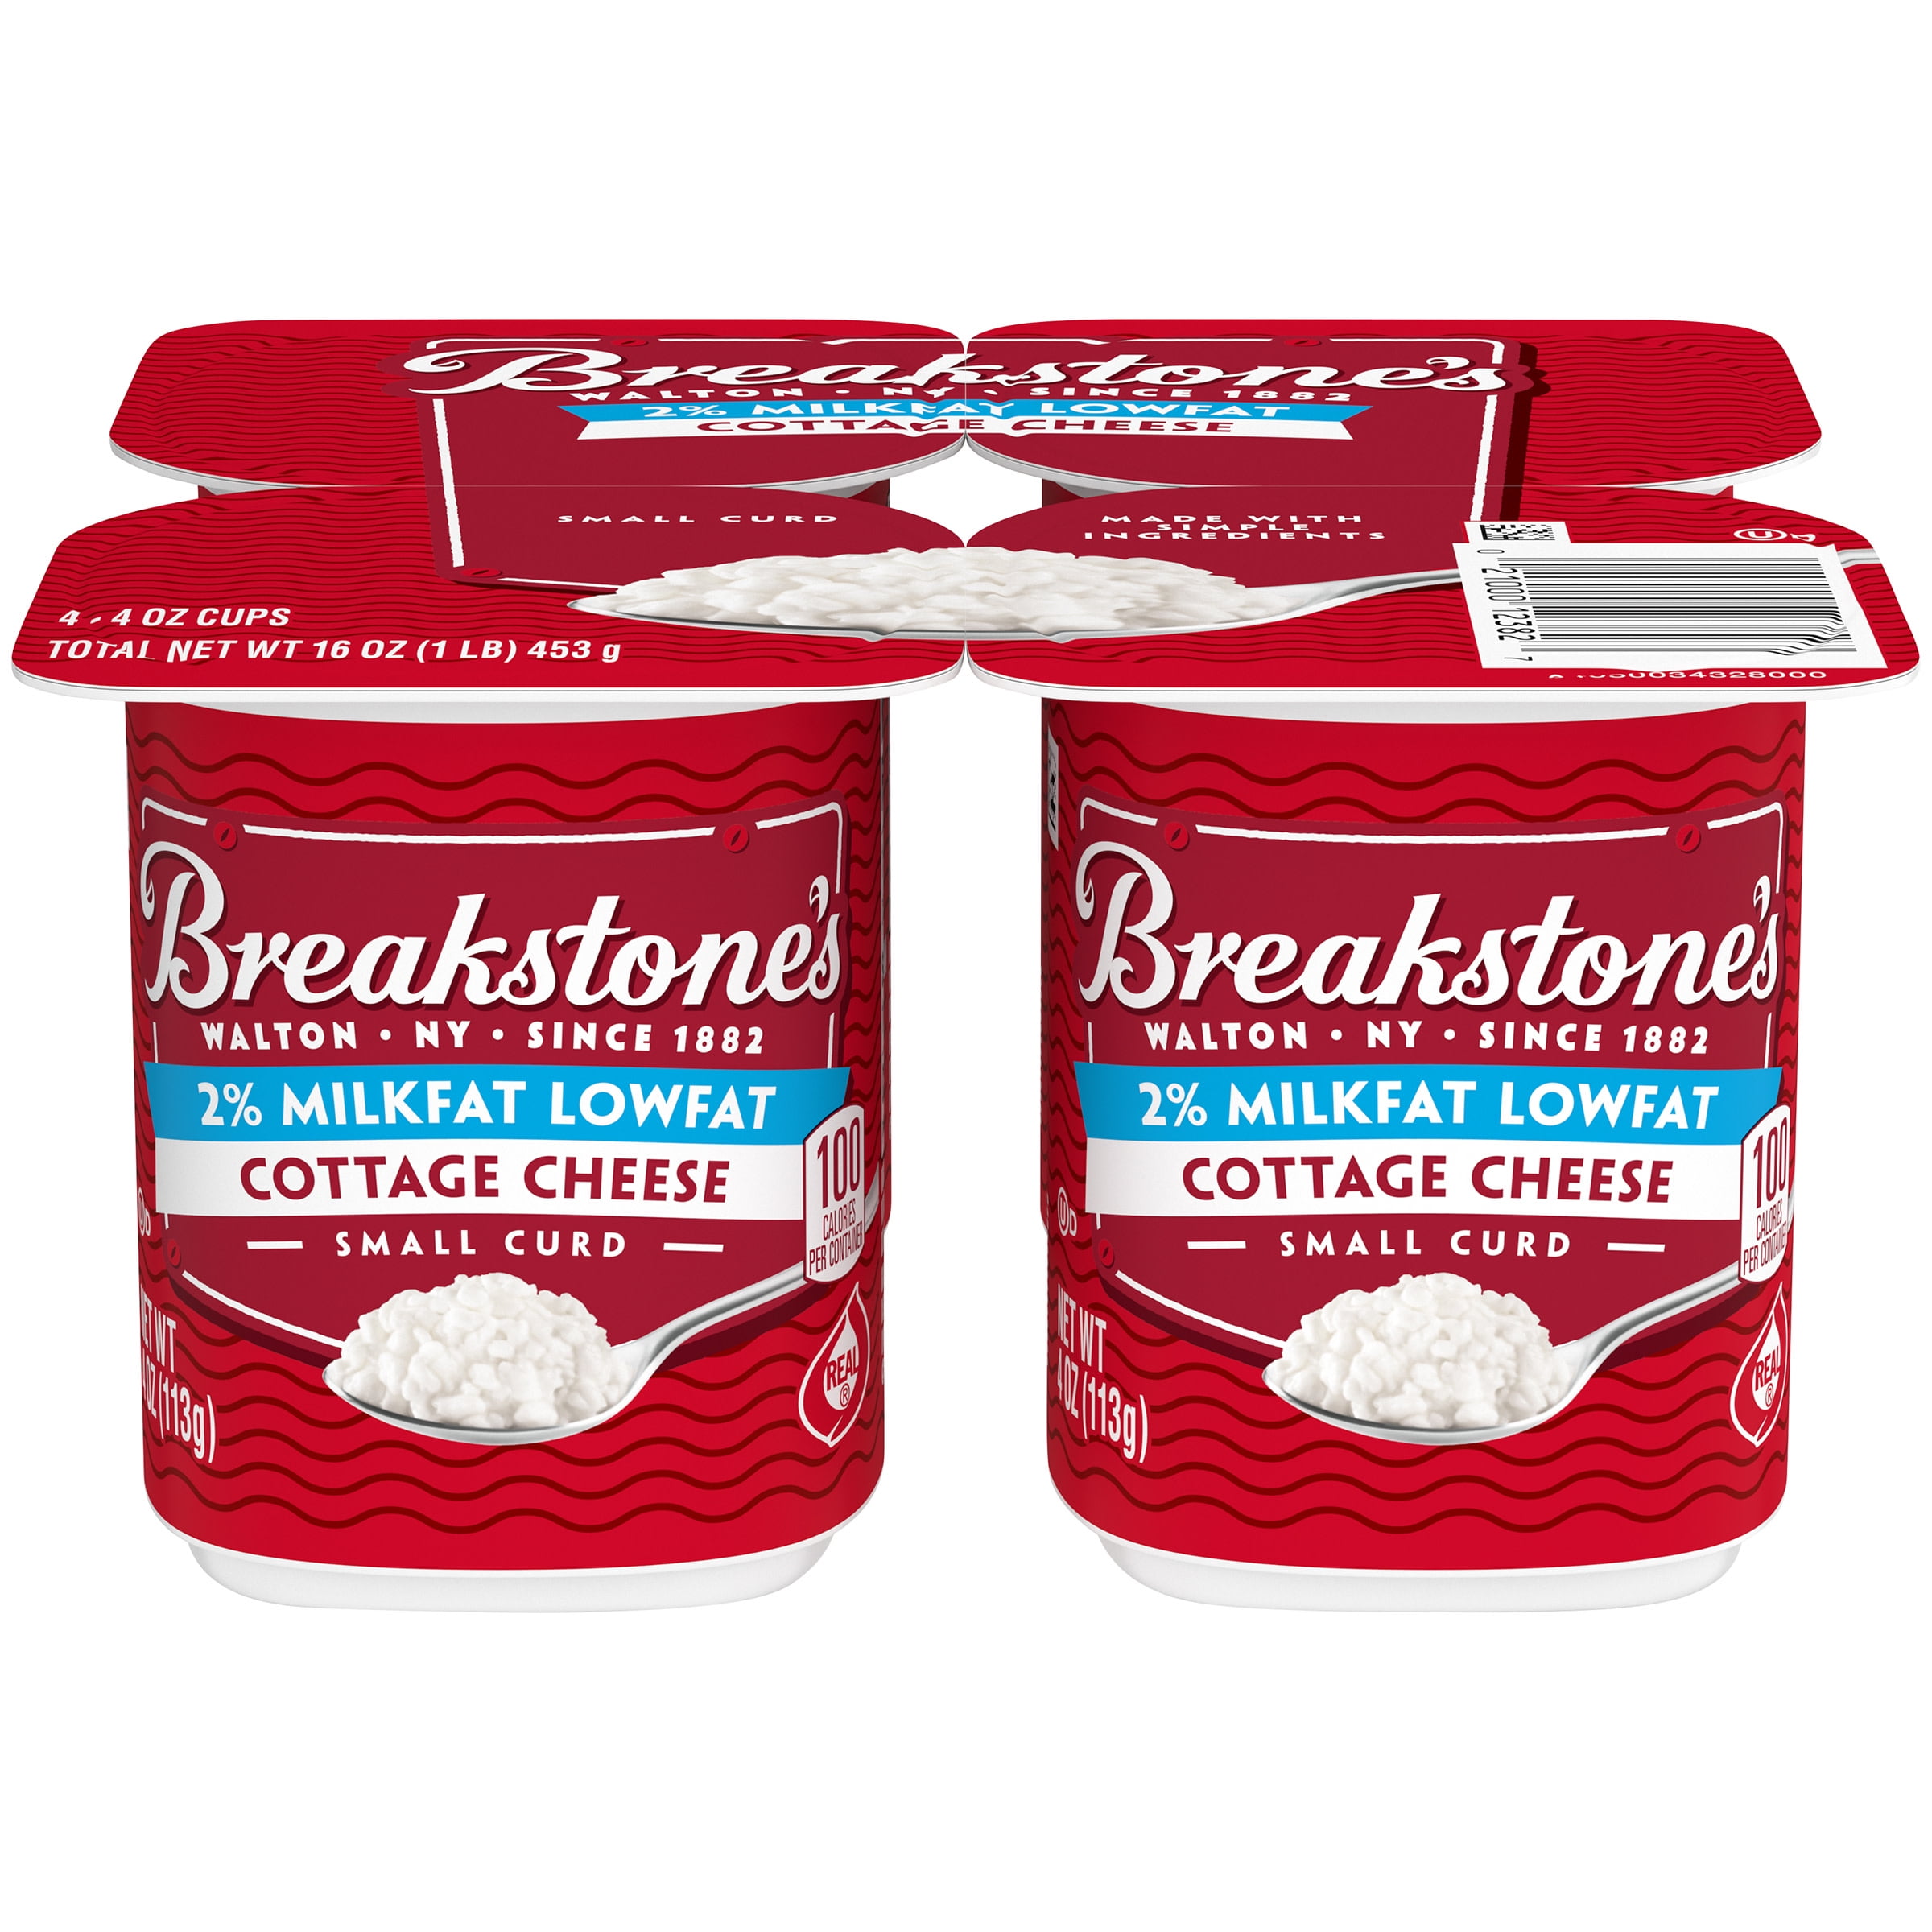 Breakstone's Lowfat Small Curd Cottage Cheese with 2% Milkfat, 4 ct Pack, 4 oz Cups